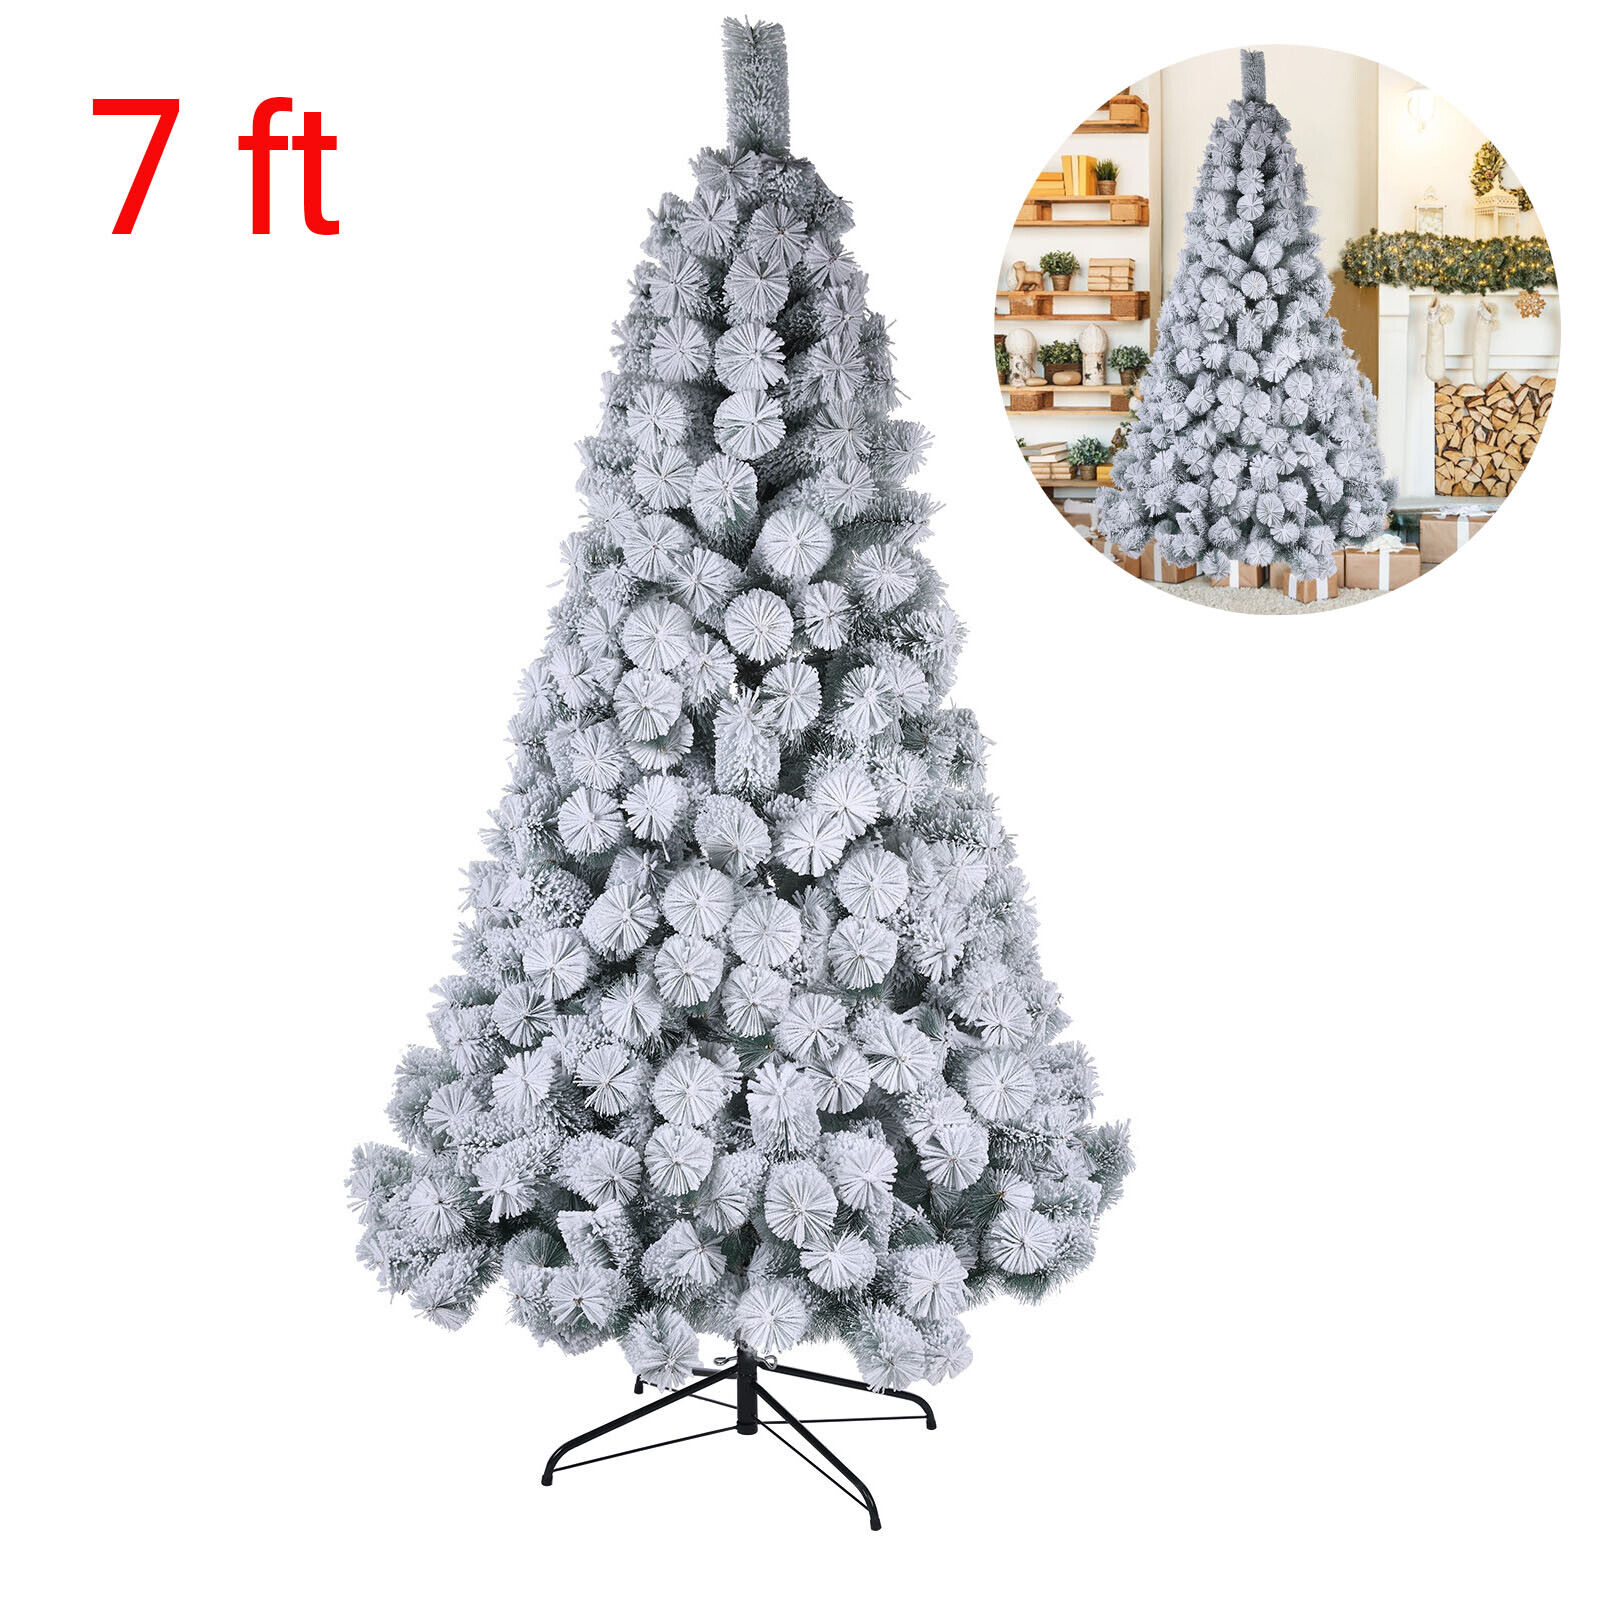 Snow Flocked Christmas Tree 7ft Artificial Holiday Decor with Metal Stand Xmas